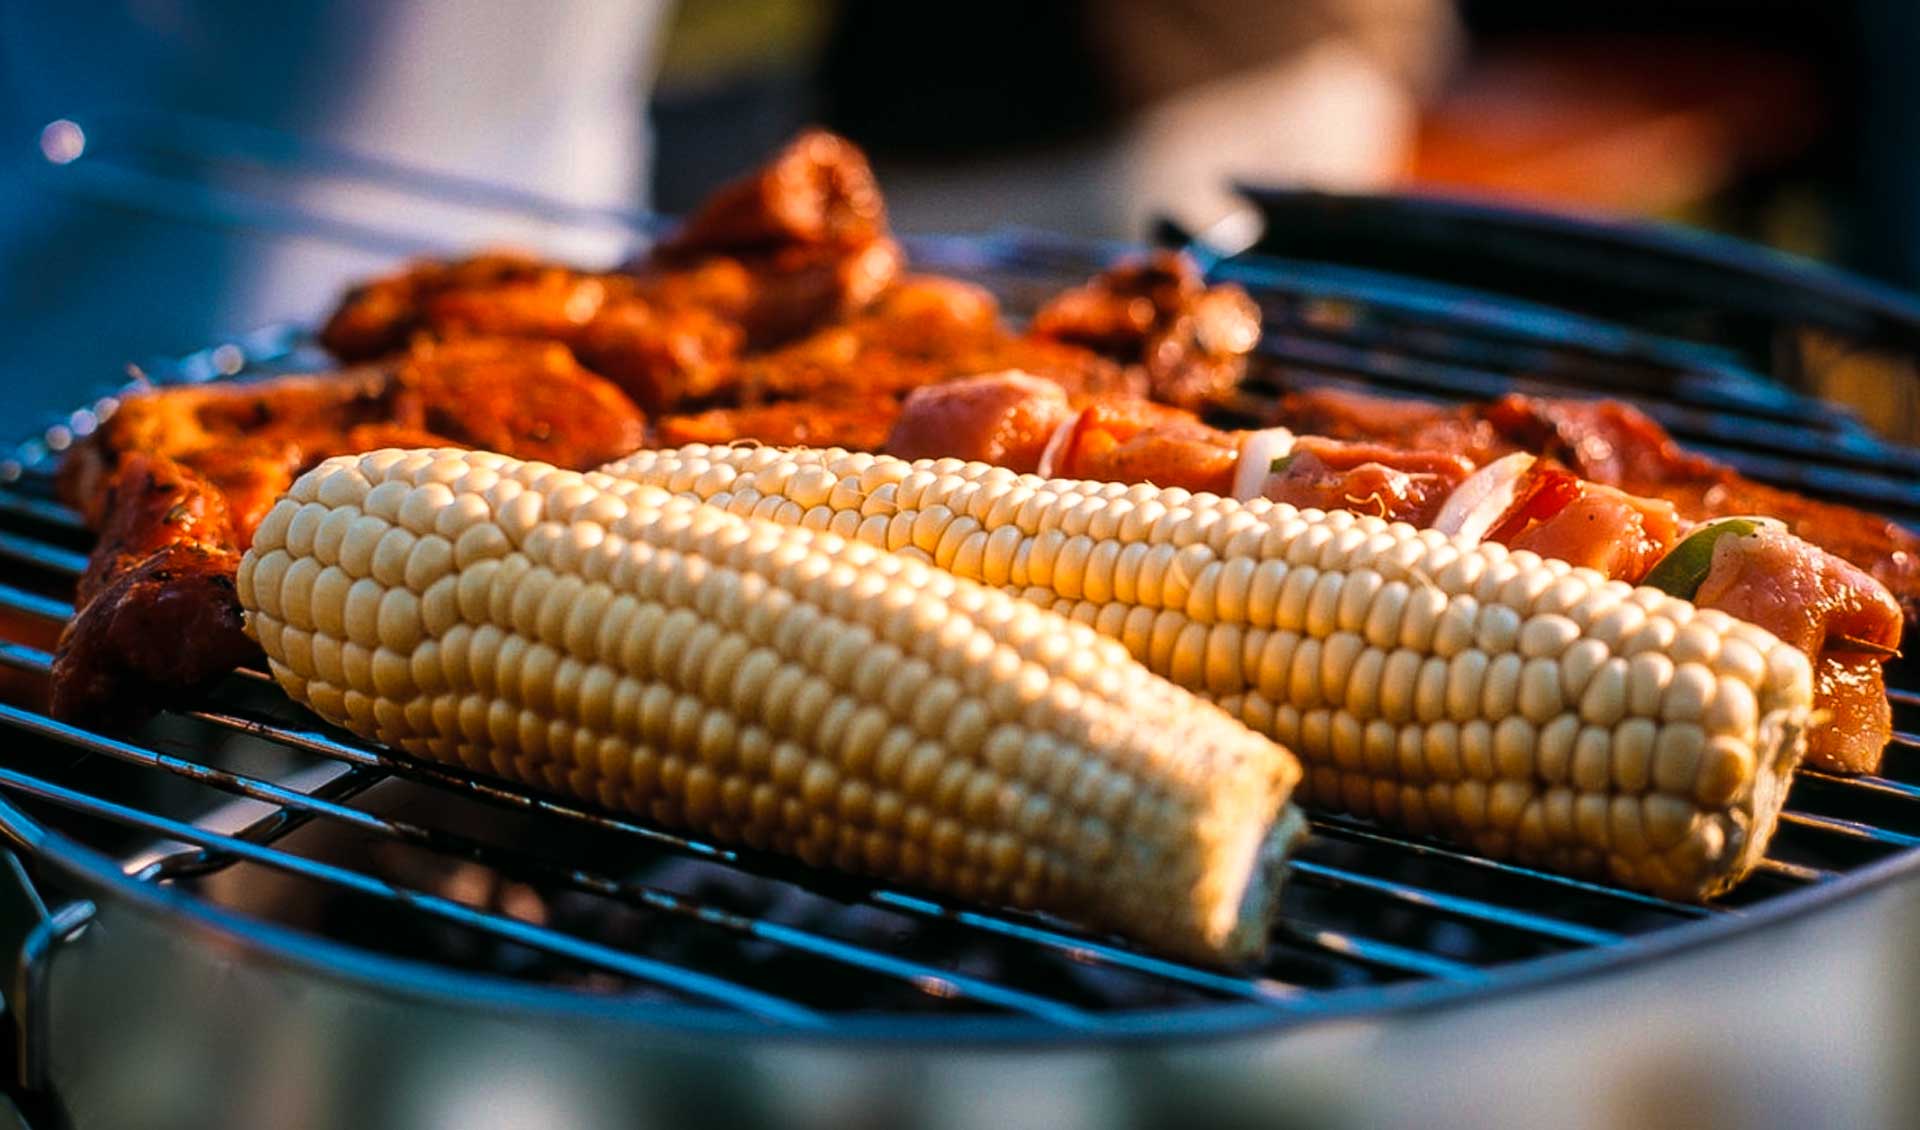 Corn on the cob and grilled meats that are served with catering for river trips in Idaho, Utah and California.